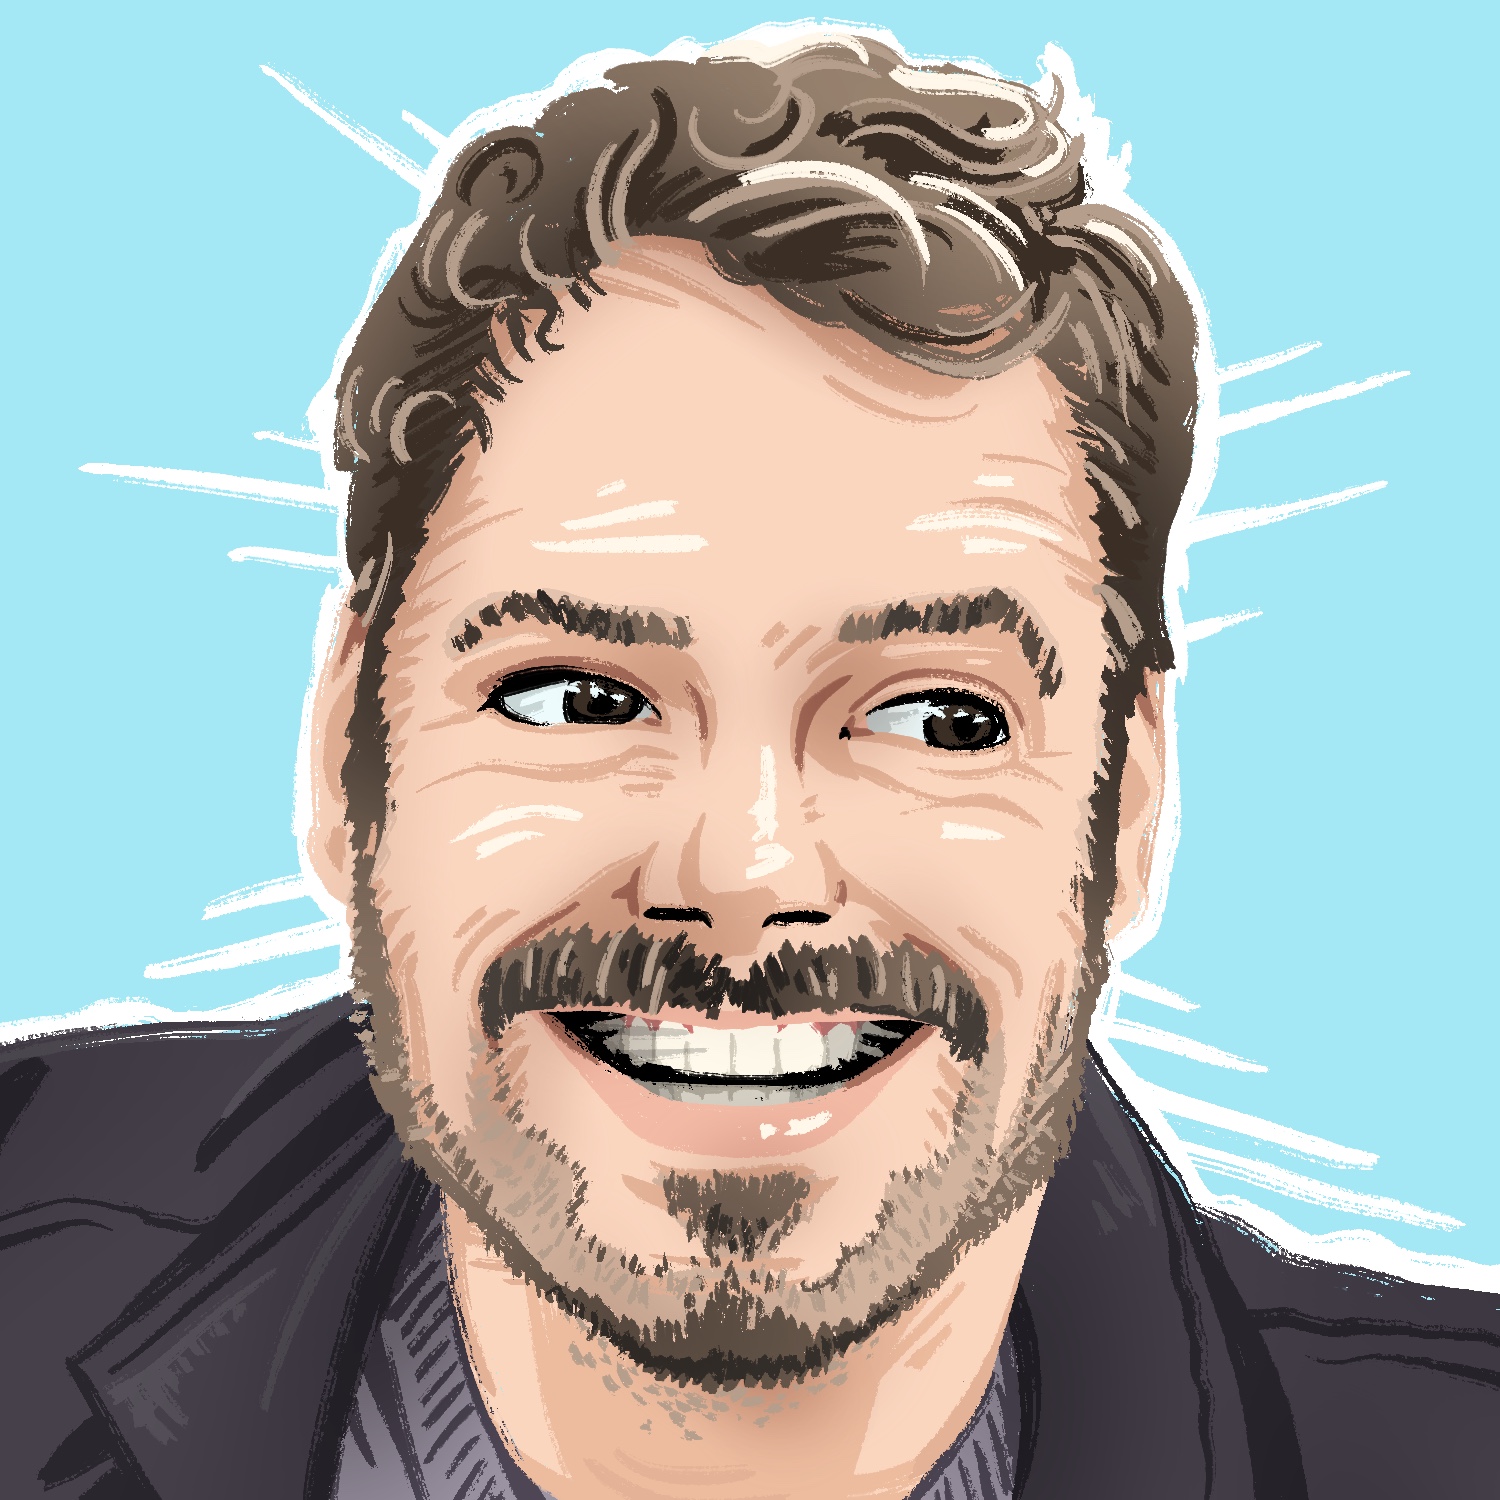 An illustration of a man laughing. The man has a light complexion, dark eyes, short wavy brown hair, and a mustache and goatee with beard stubble. His face is pointed at the viewer, but his eyes are looking to the right. He is wearing a dark coat and top and is drawn over a light blue background.